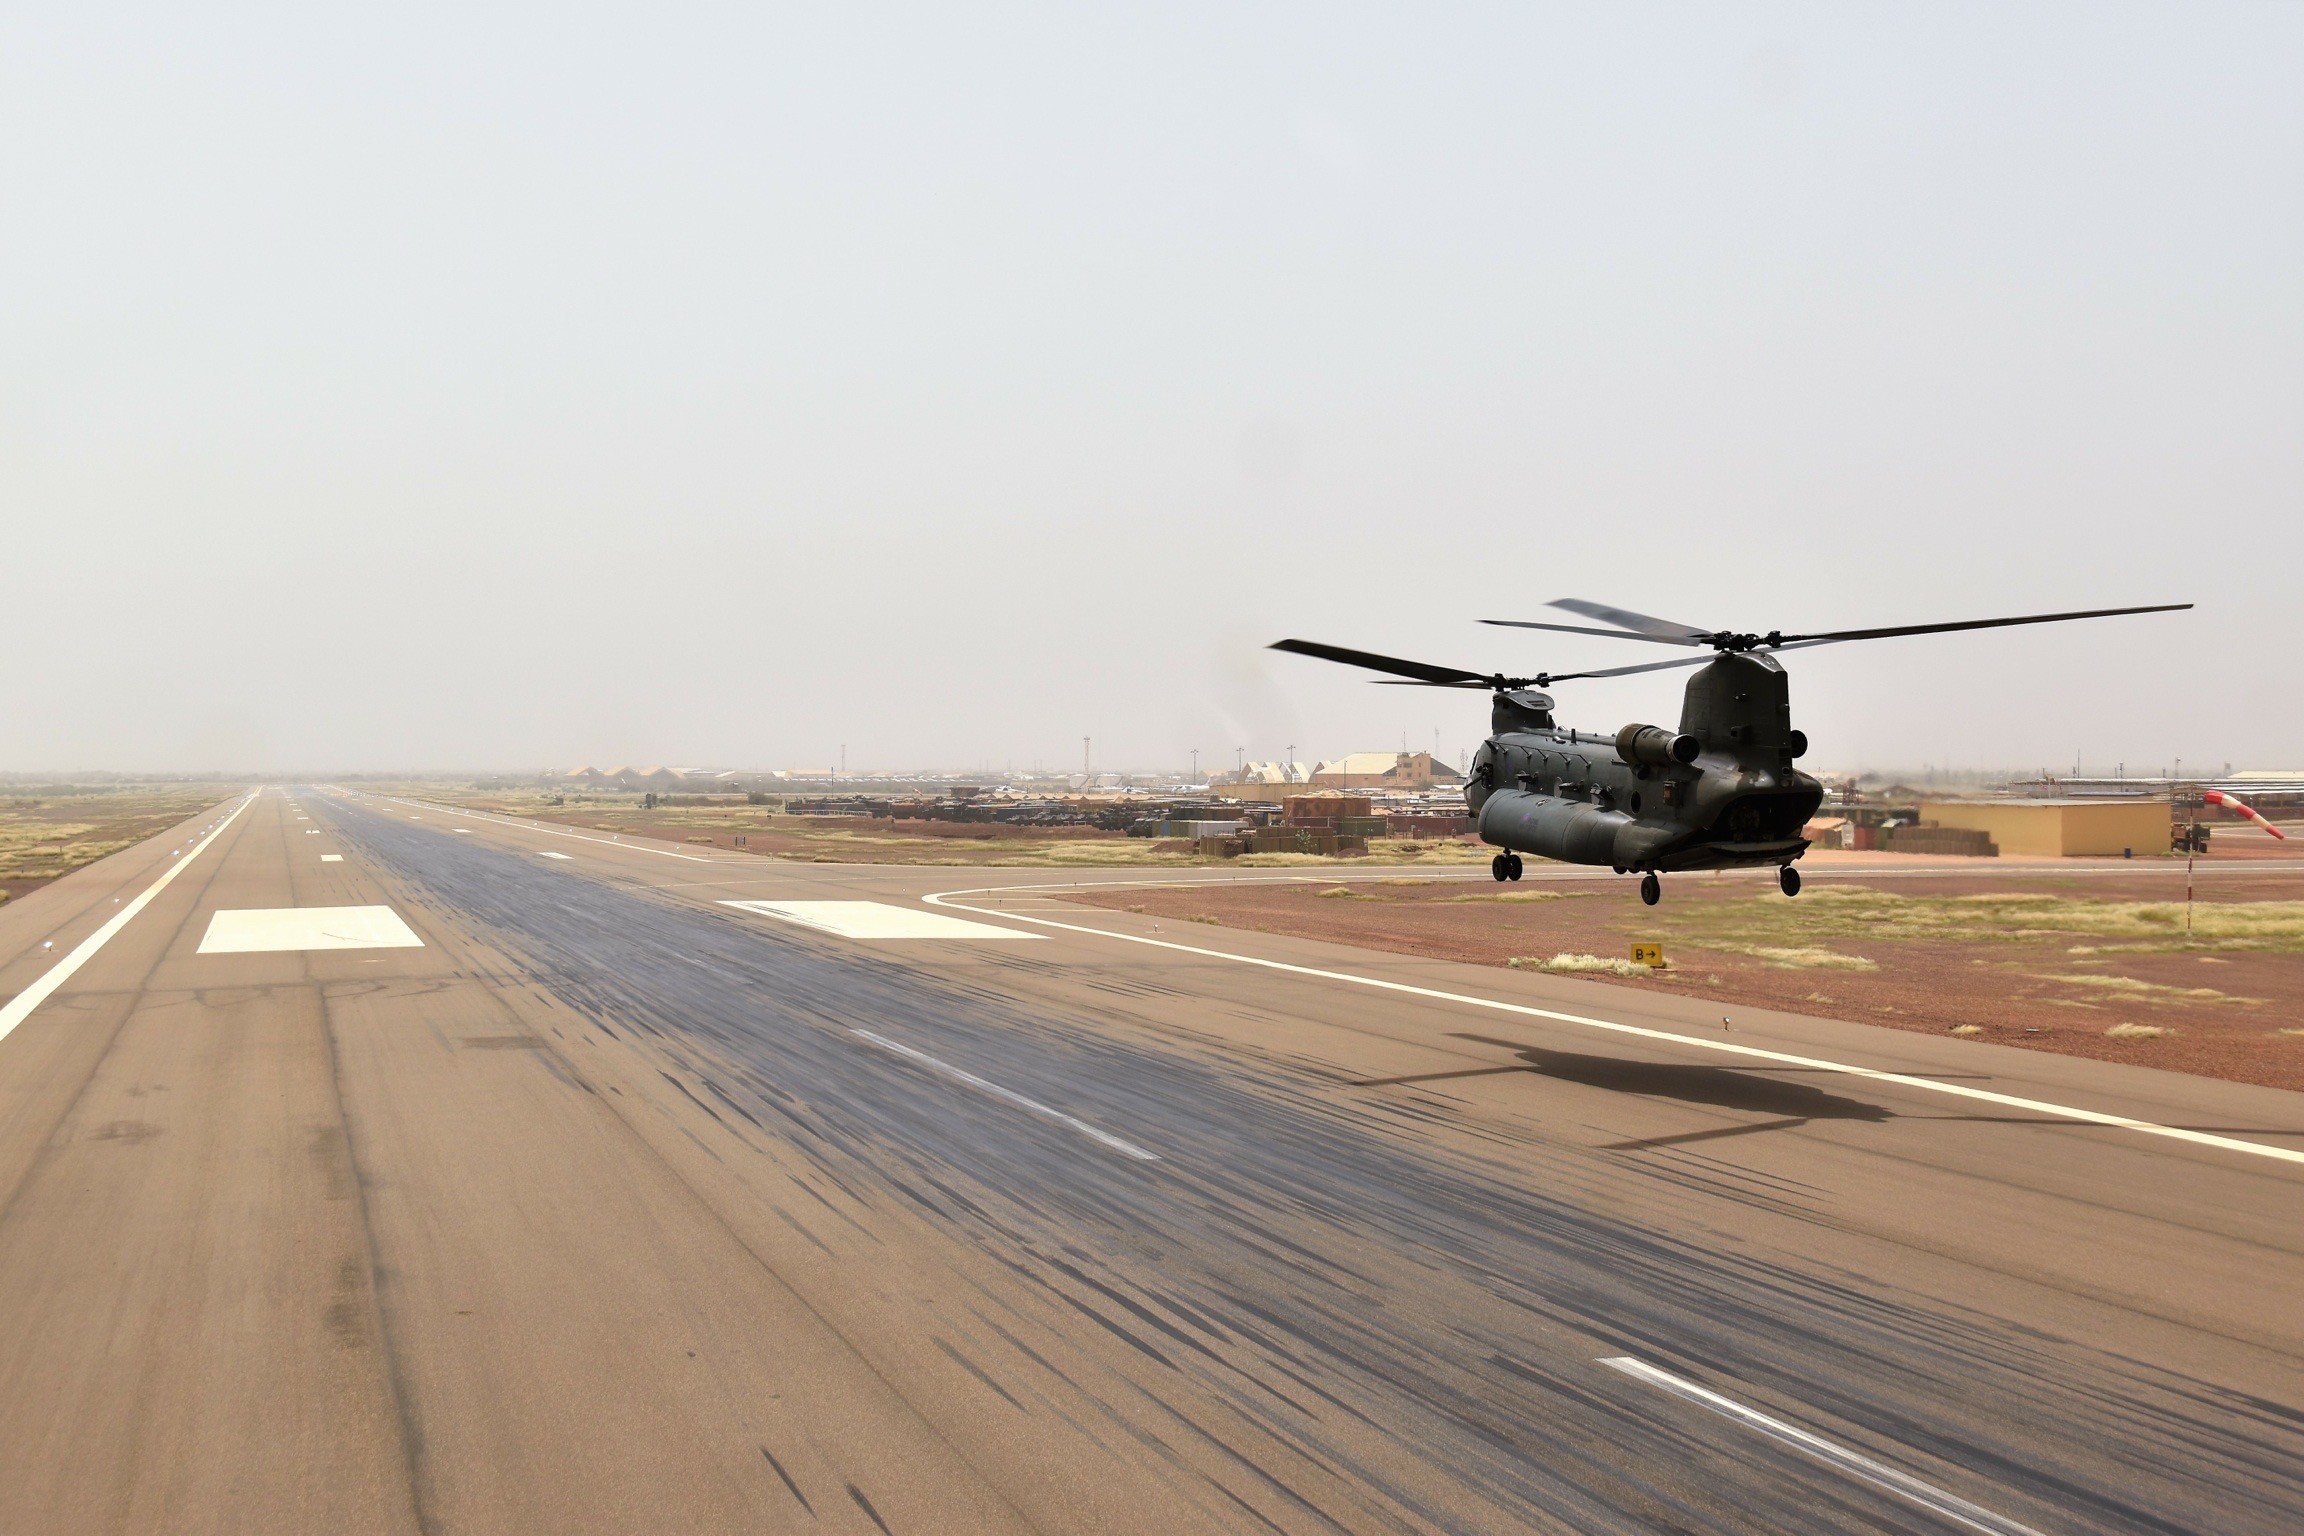 Chinook flying low over the runway in Mali.